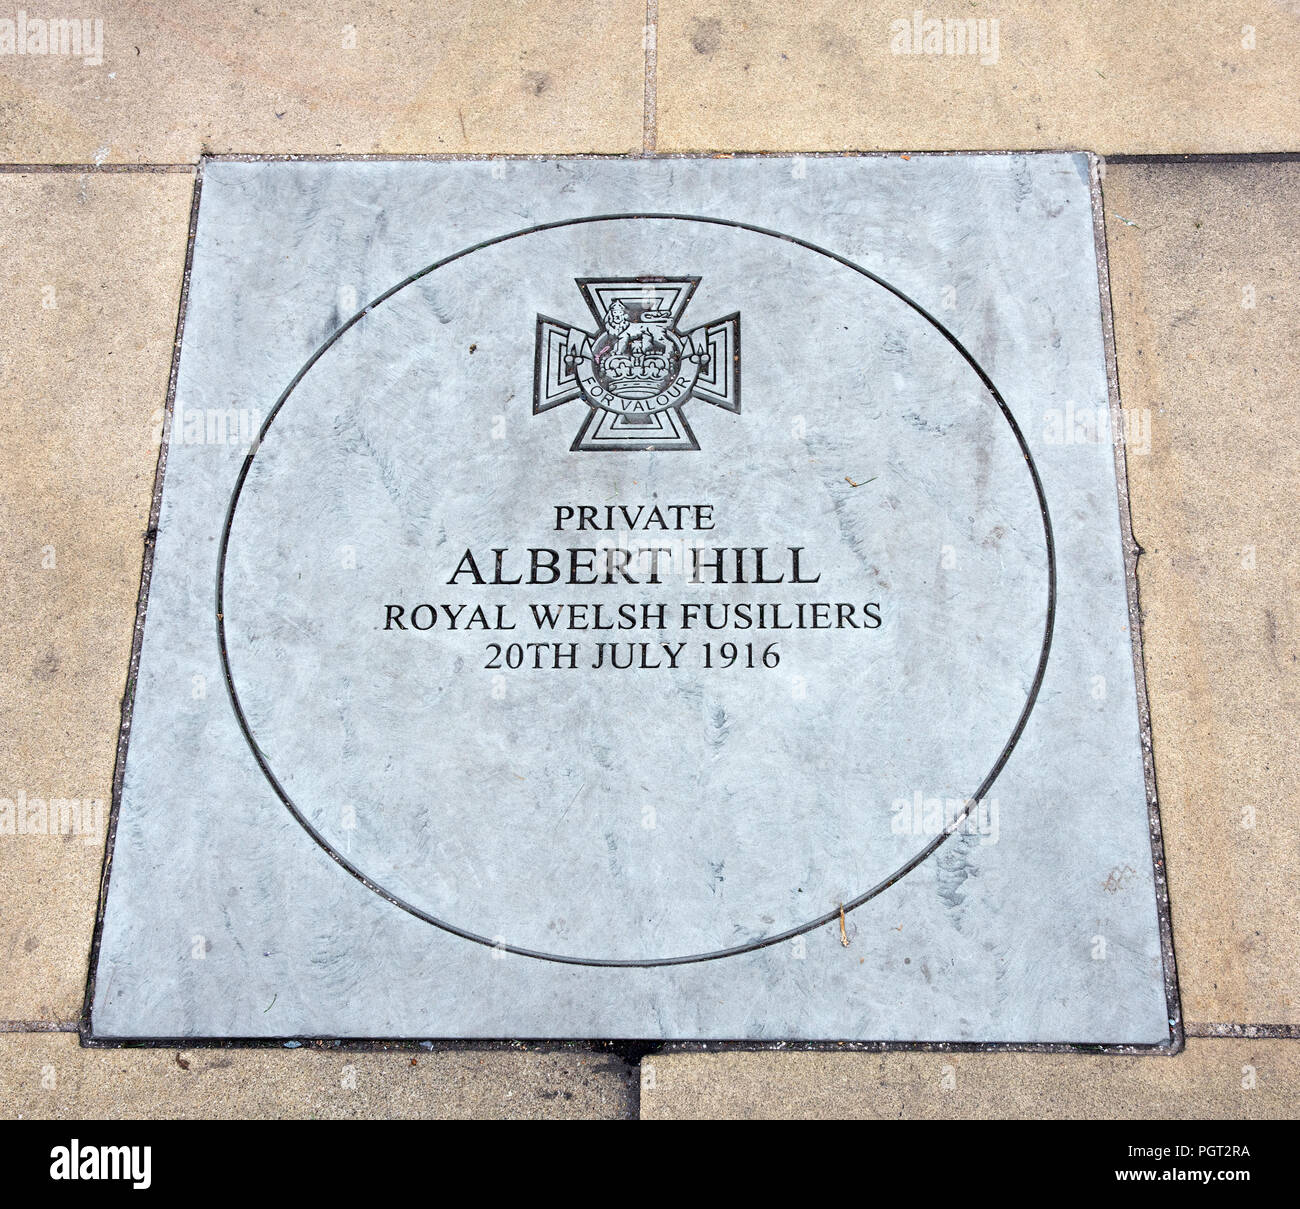 Plaque at foot of Manchester England war memorial showing Victoria Cross awarded Private Albert Hill Royal Welsh Fusiliers 20th July 1916 Stock Photo